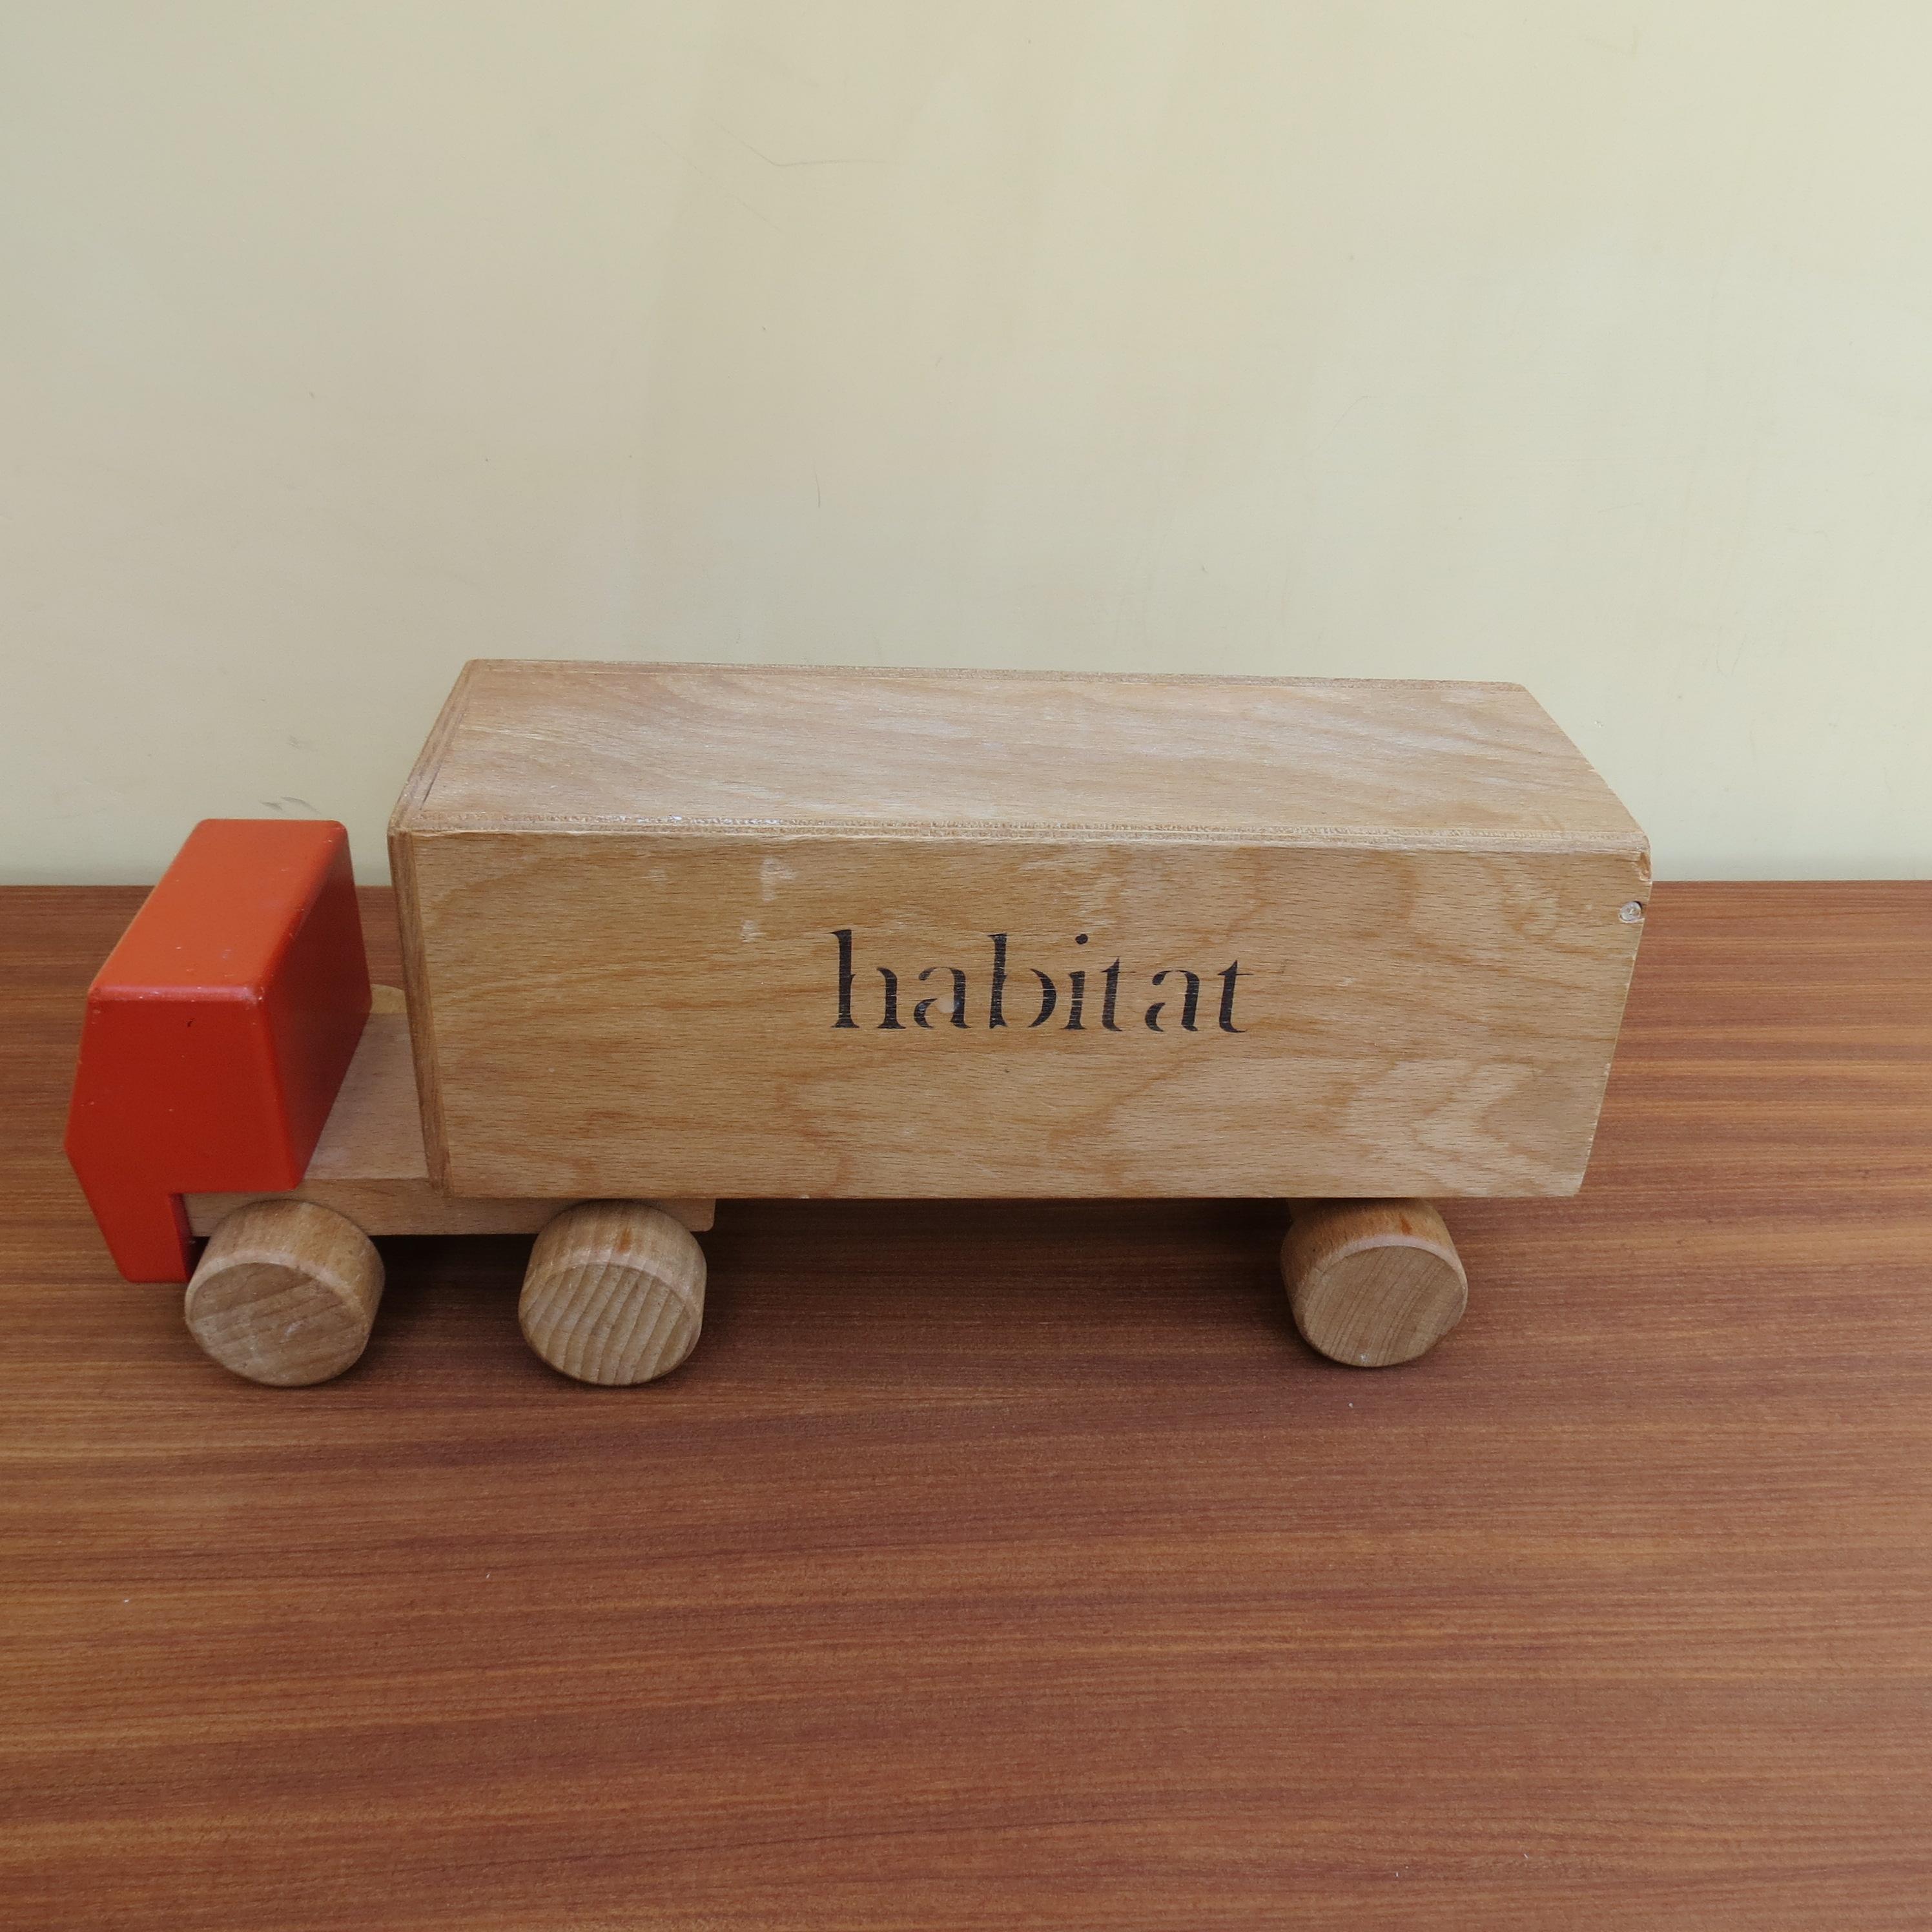 A wonderful toy lorry originally used for advertising Habitat. Dates from the 1970s. Made from wood and plywood. Painted wooden cab with pivoting trailer with opening tailgate. In good vintage condition, stamped Habitat to the side of the lorry.